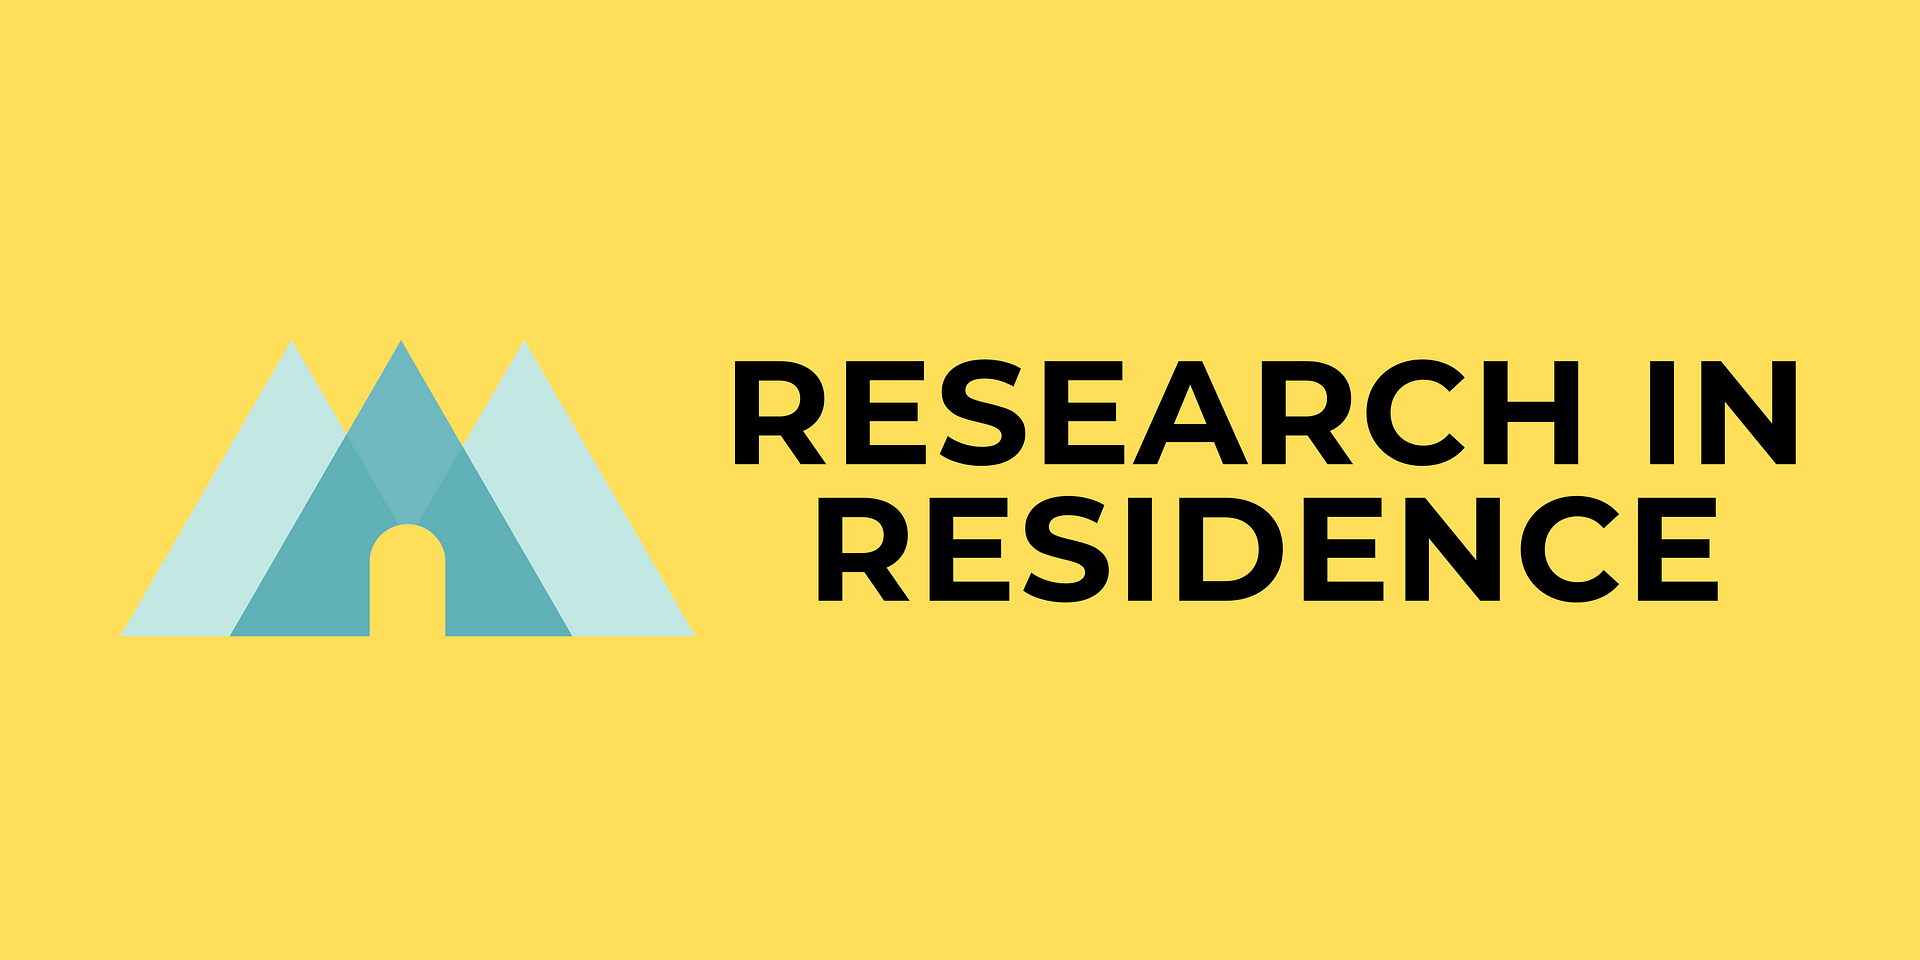 Research in Residence.